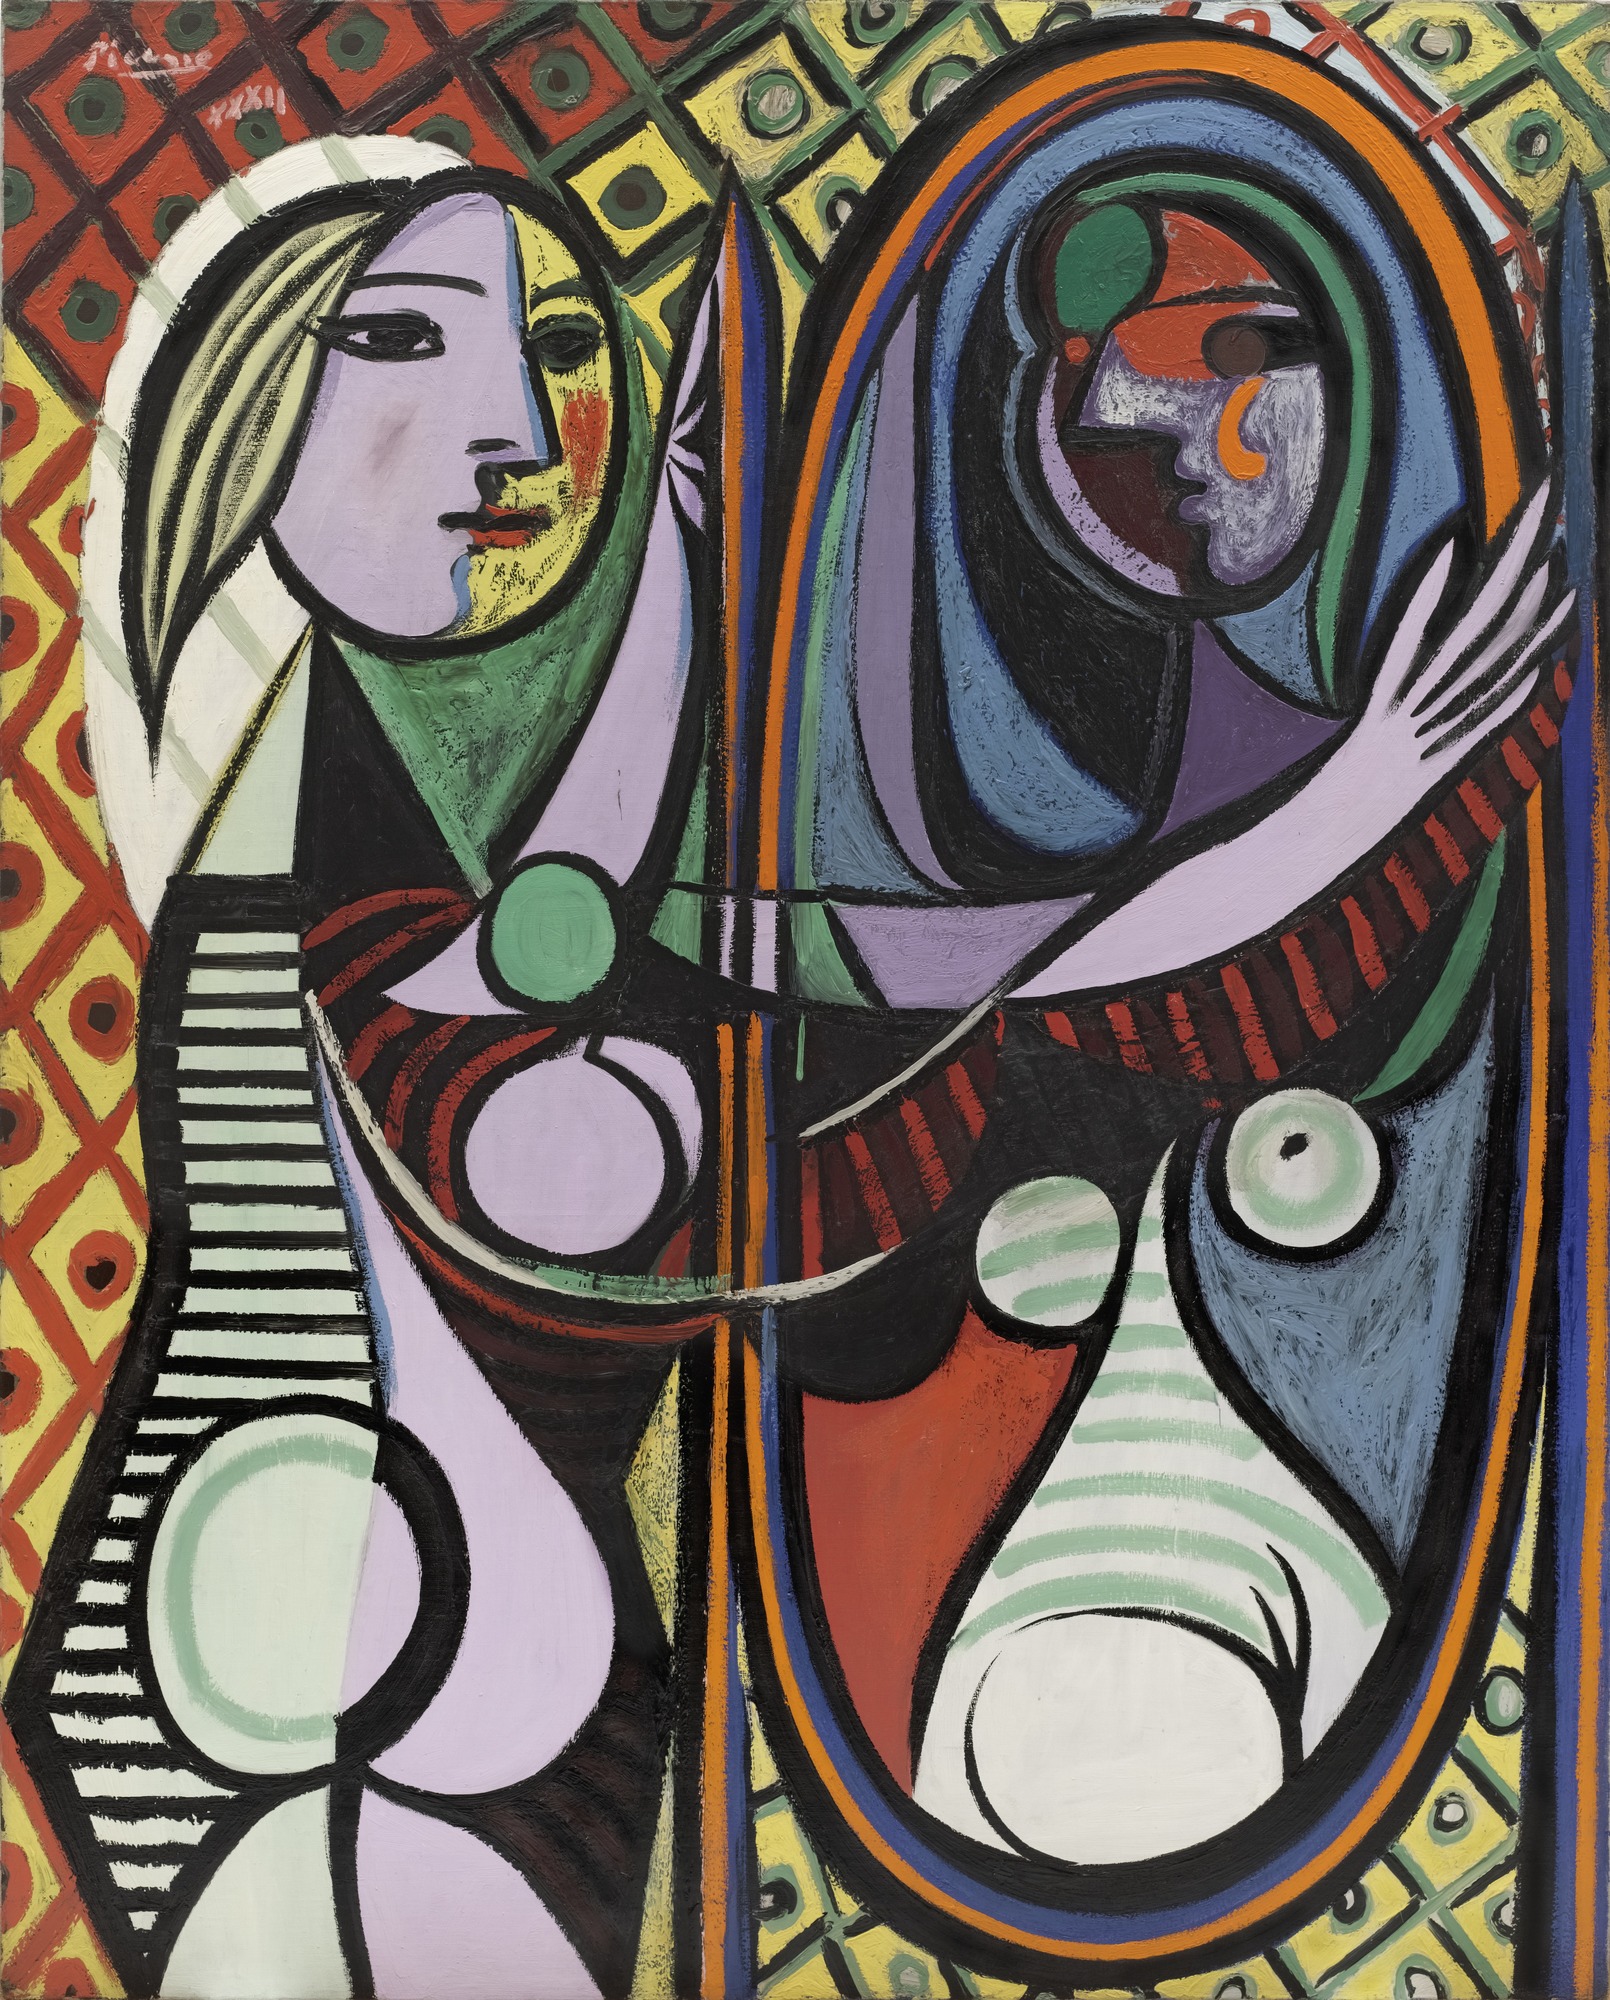 Pablo Picasso. Girl before a Mirror. Paris, March 14, 1932 | MoMA